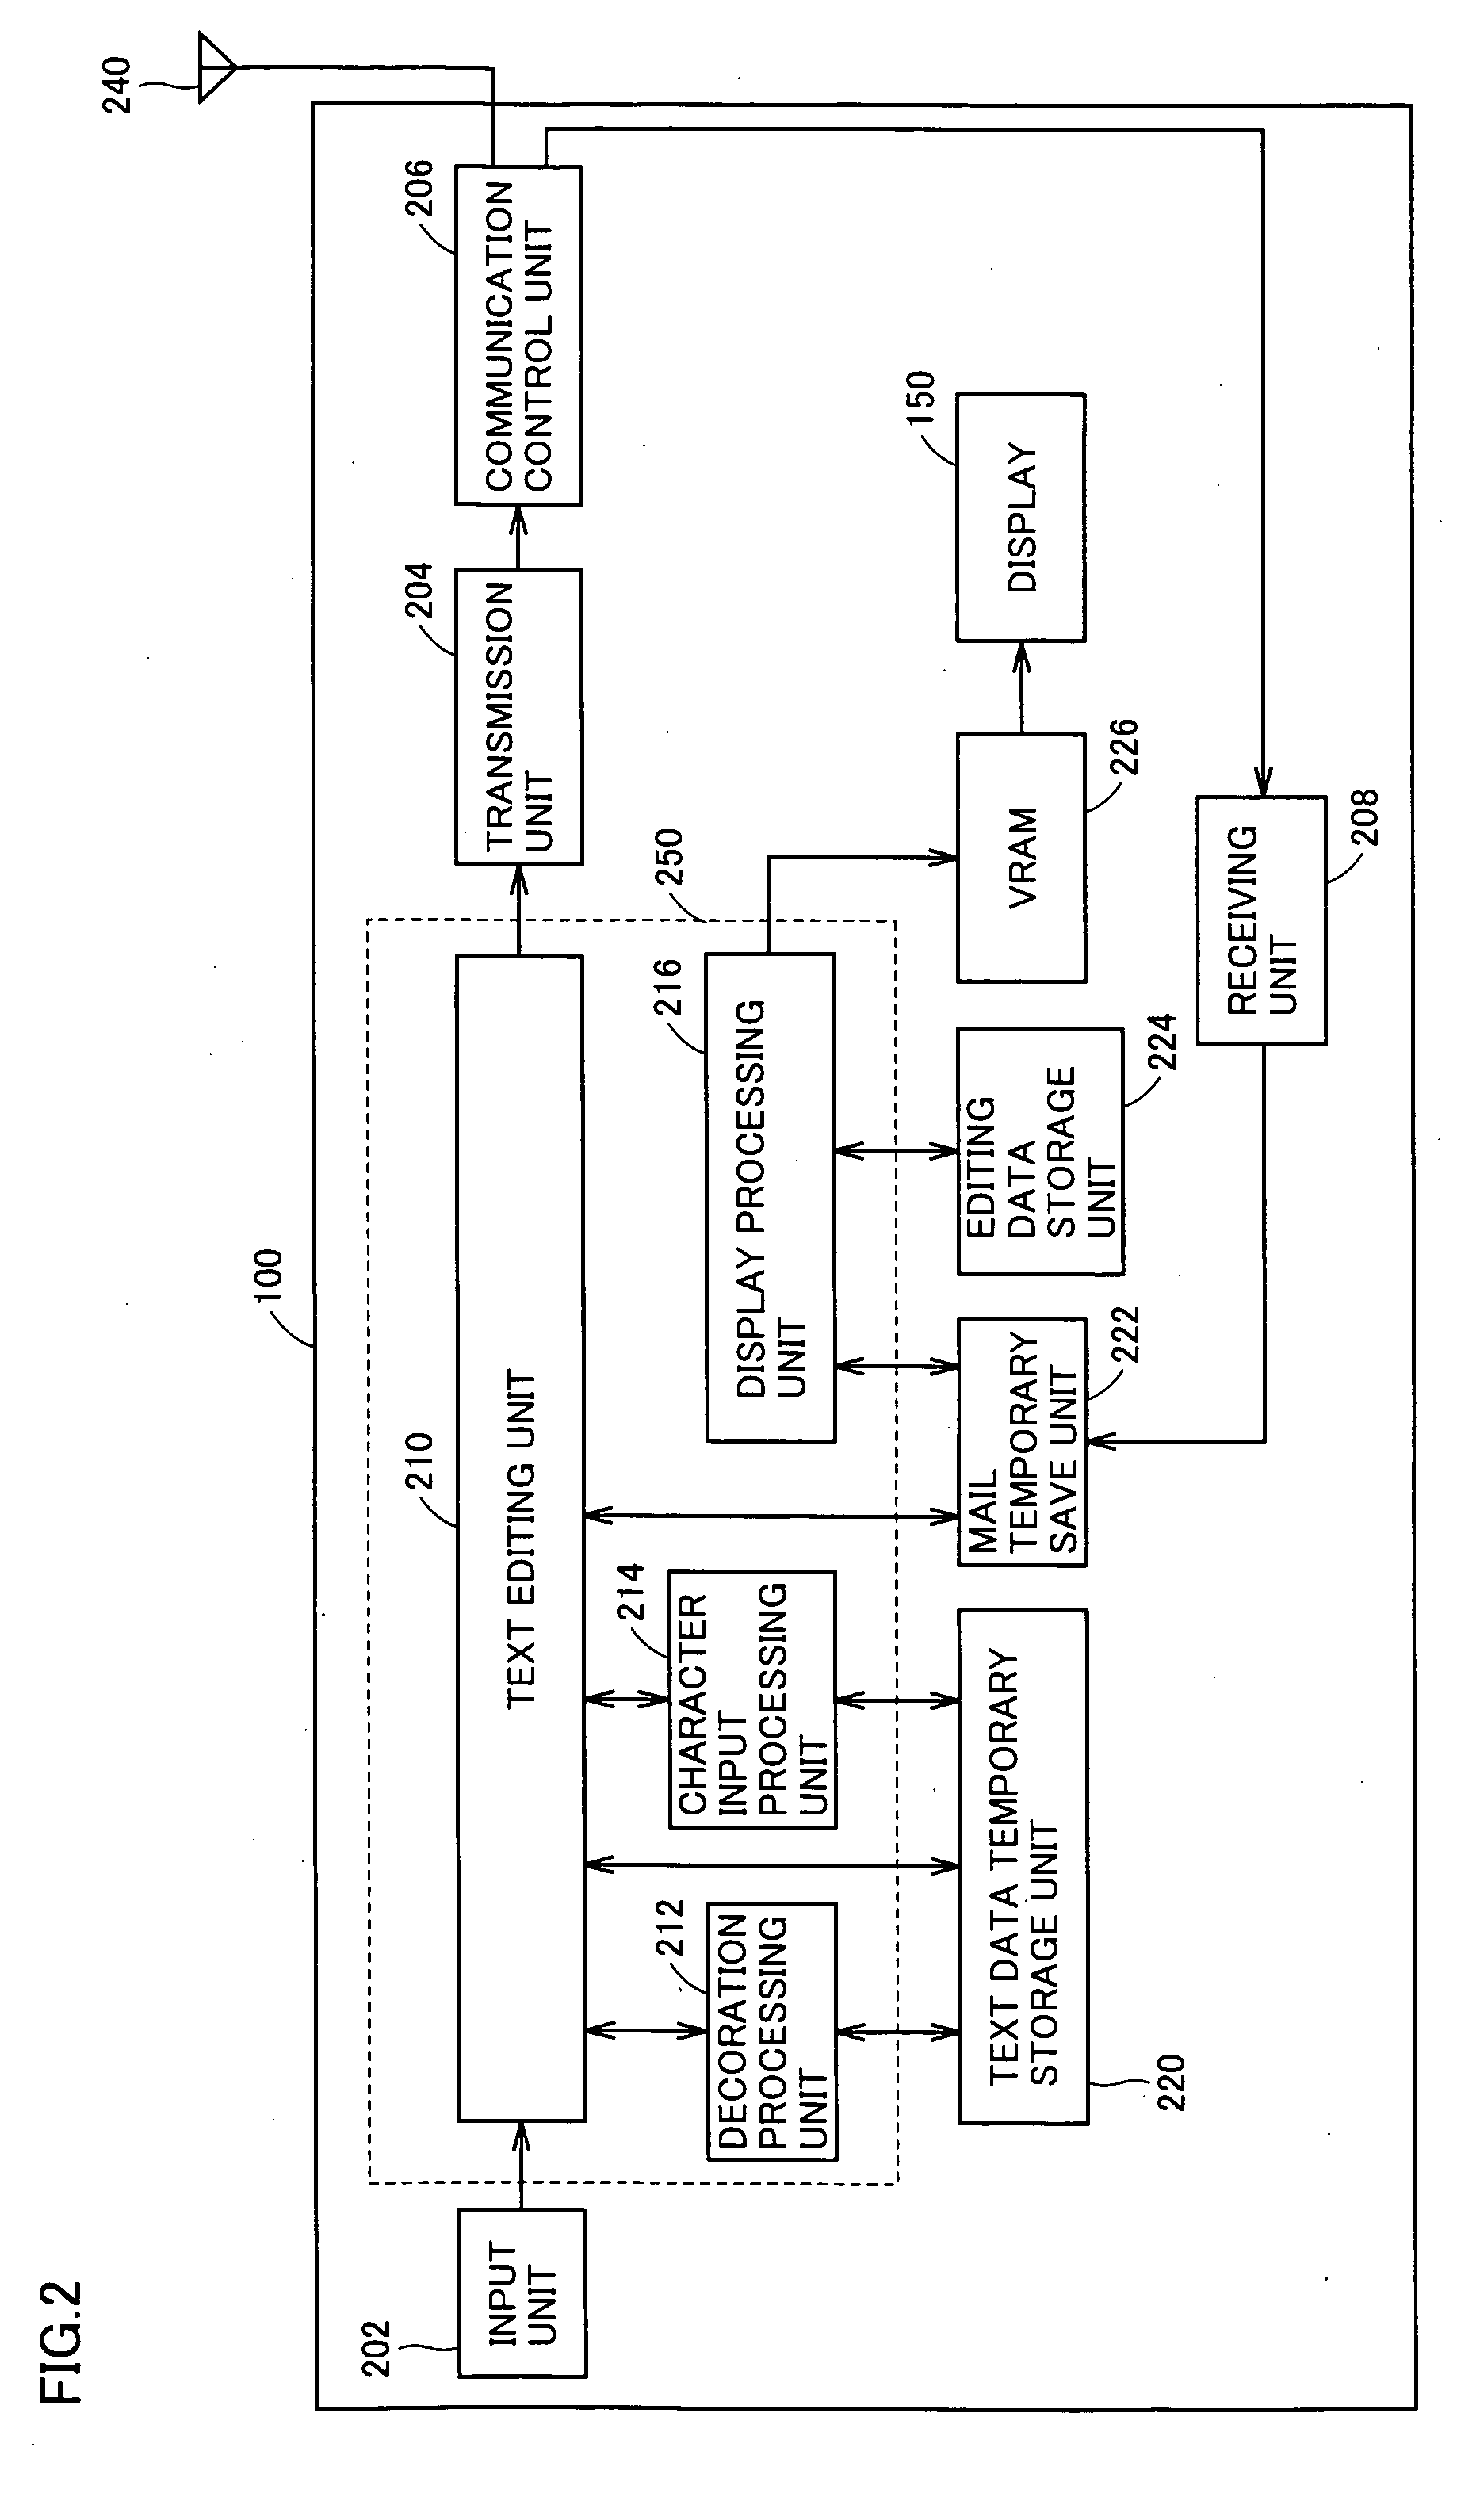 Portable information apparatus, character display method in portable information apparatus, and program product for implementing the method